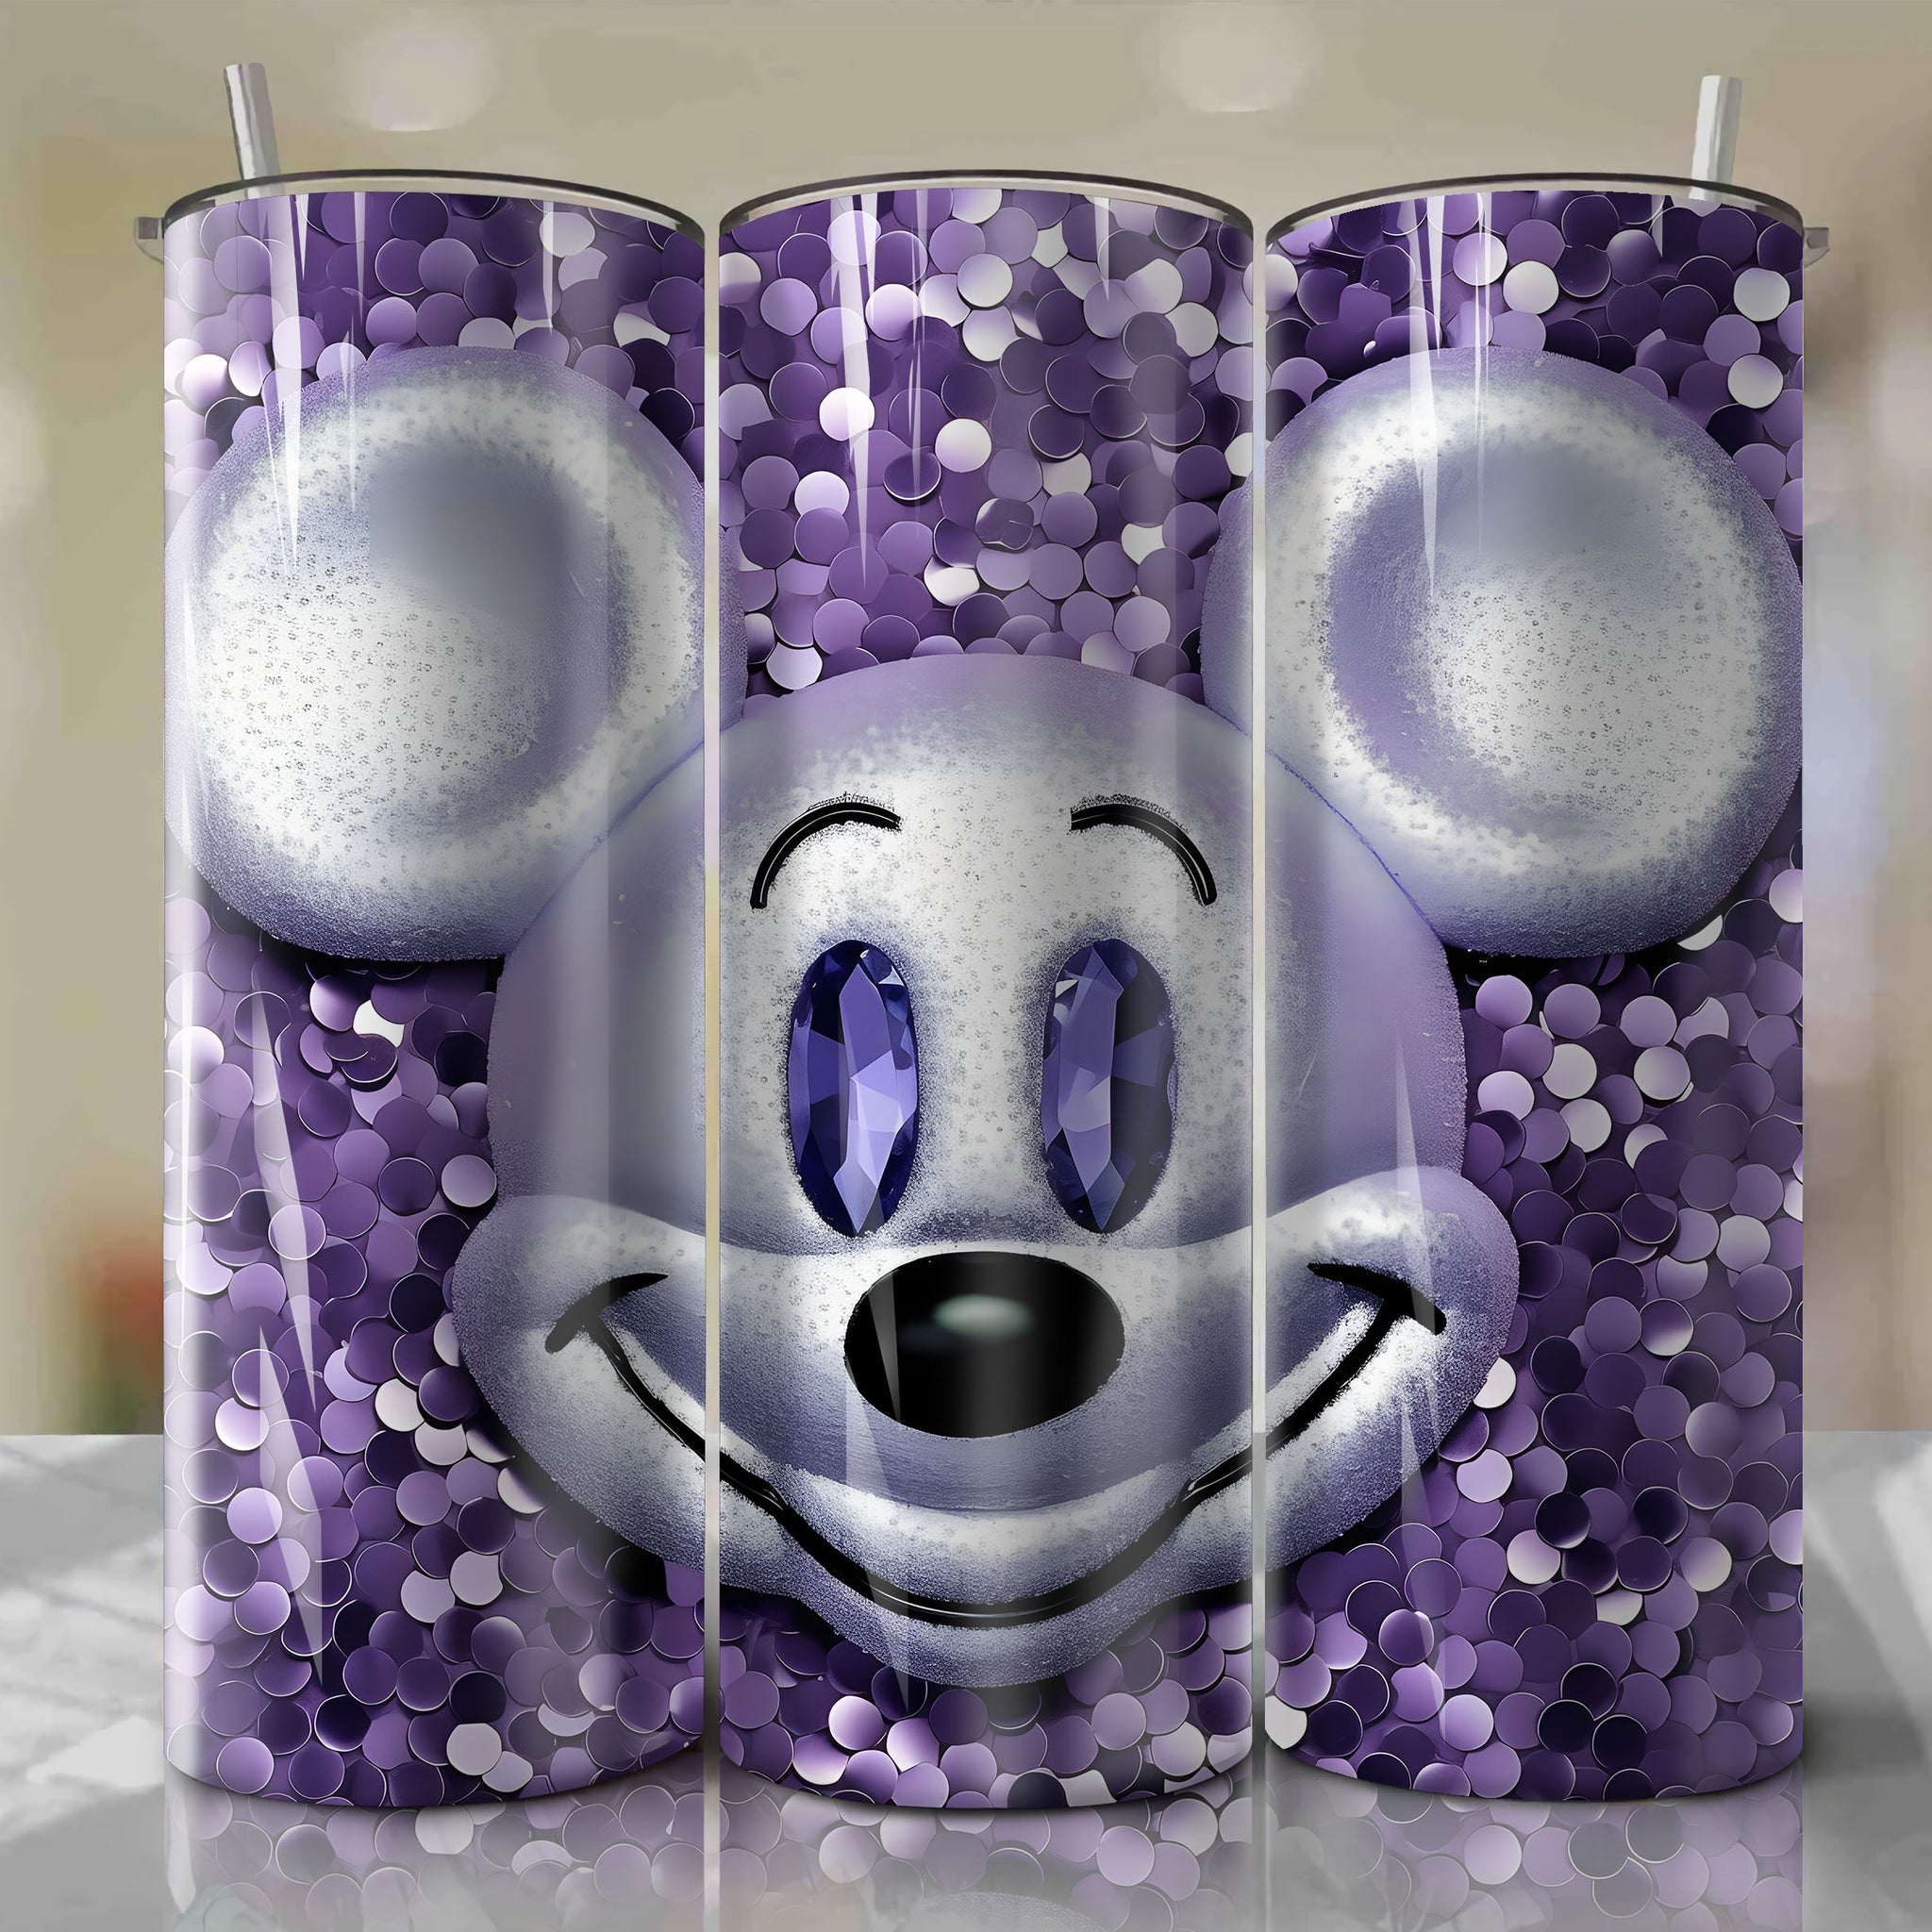 Magical Mickey Mouse Face 3D Bling Art - Digital Download for Sublimation Crafts